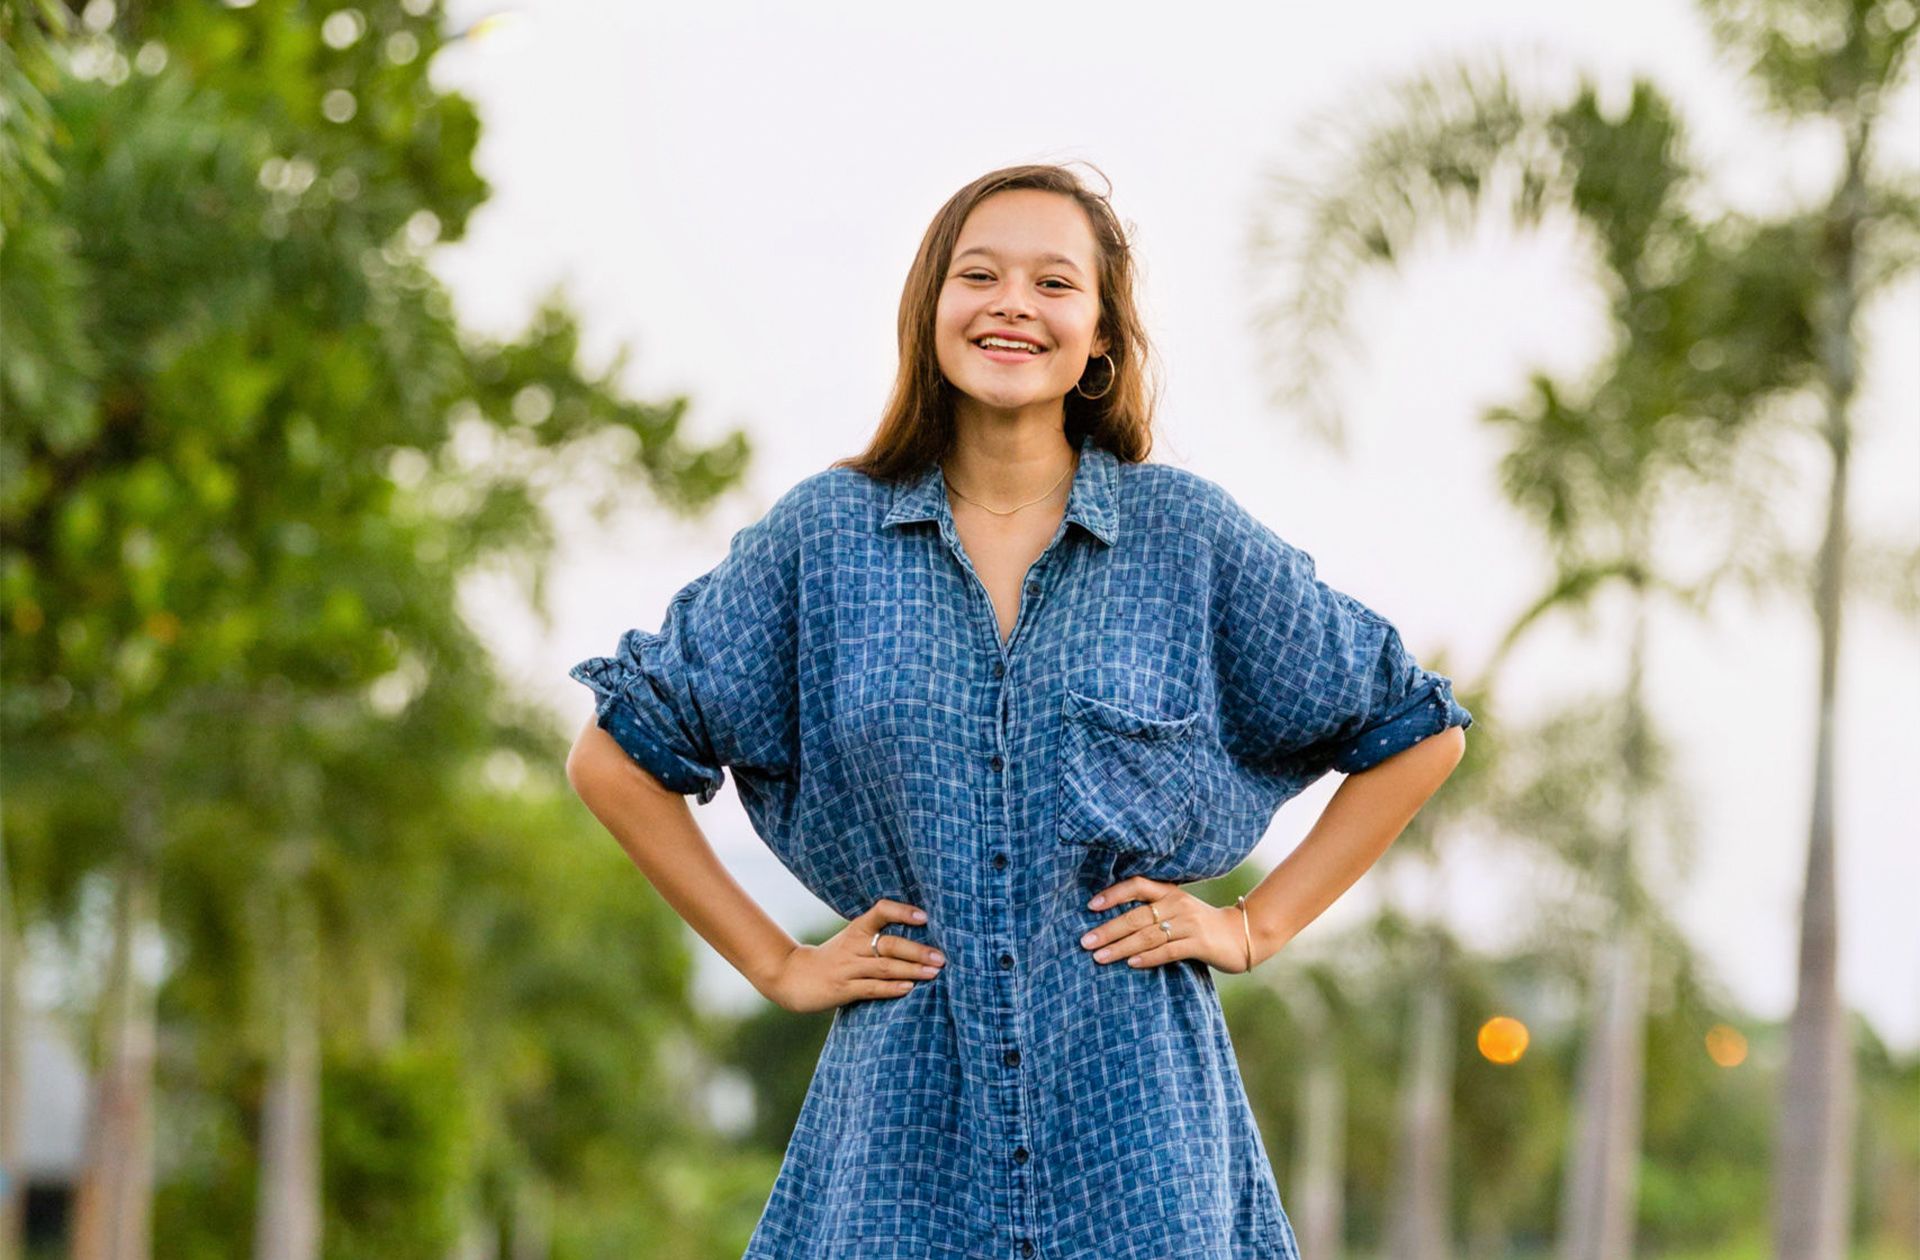 Melati Wijsen (20), activist, founded the Bye Bye Plastic Bags initiative committed to banning single-use plastic on the island of Bali when she was just 12. Her latest project, YOUTHOPIA, is a global platform, which aims to train a generation of change makers, equipping them with the tools they need to bring about positive change.